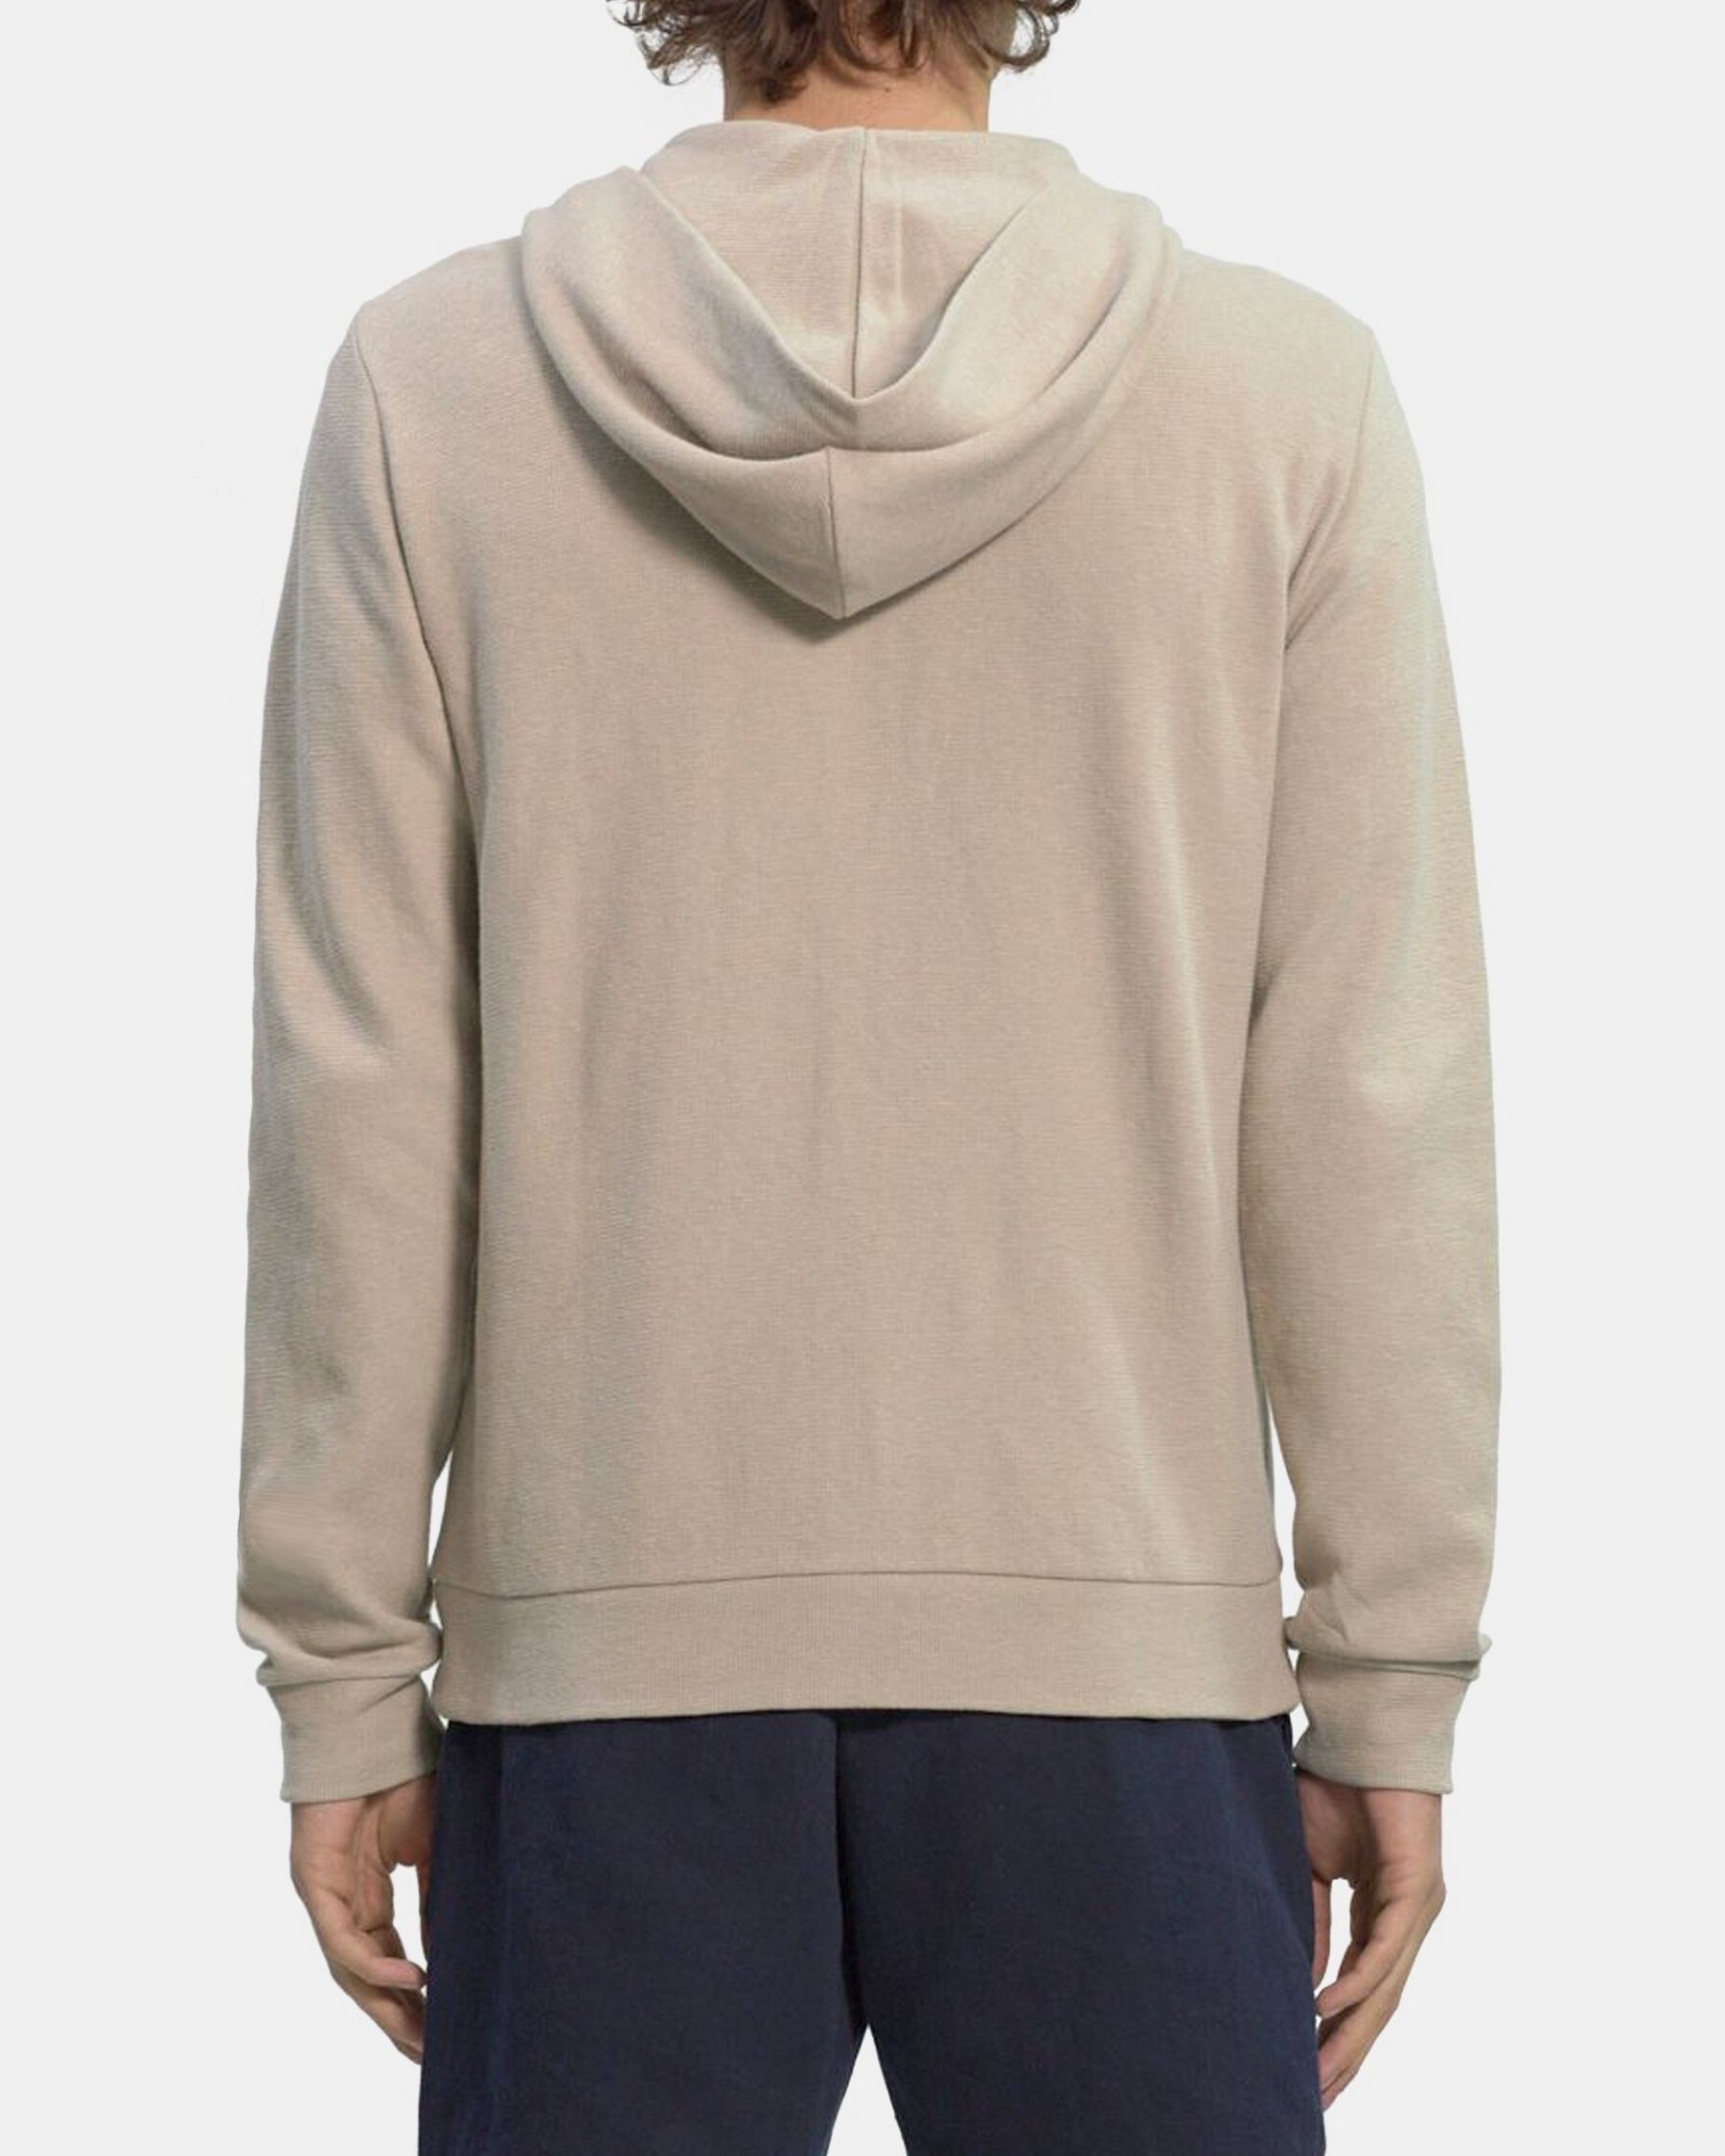 Zip Up Hoodie in Waffle Knit Cotton